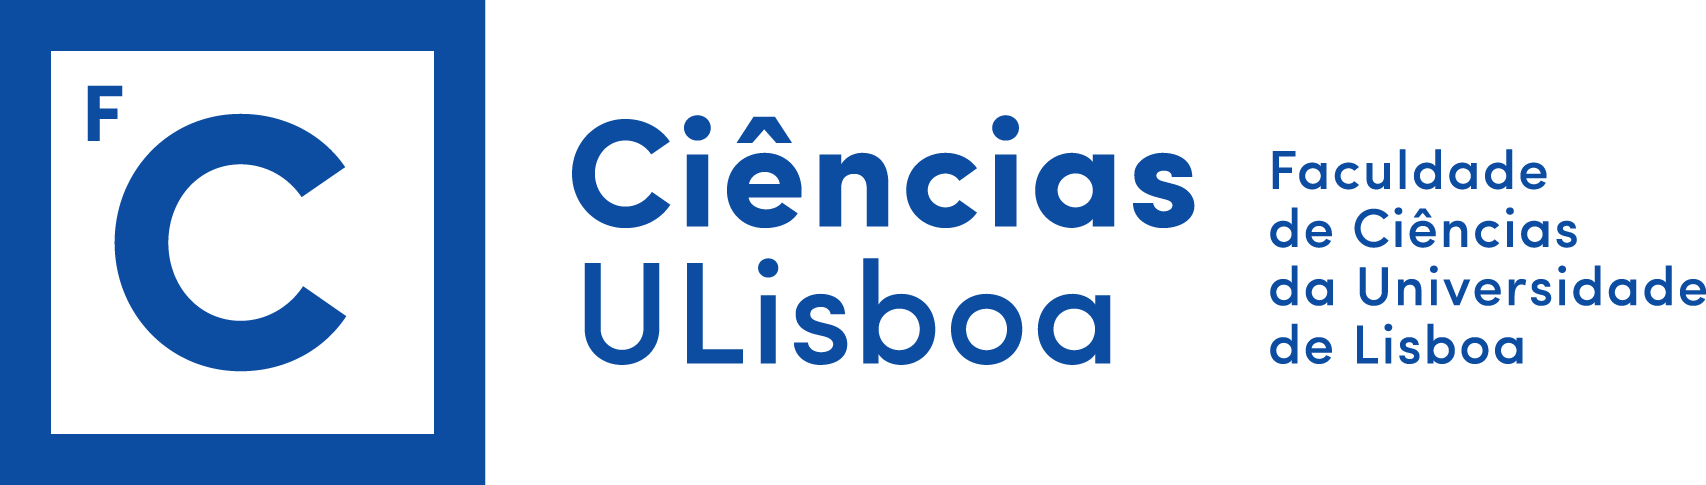 Faculty of Sciences of the University of Lisbon logo